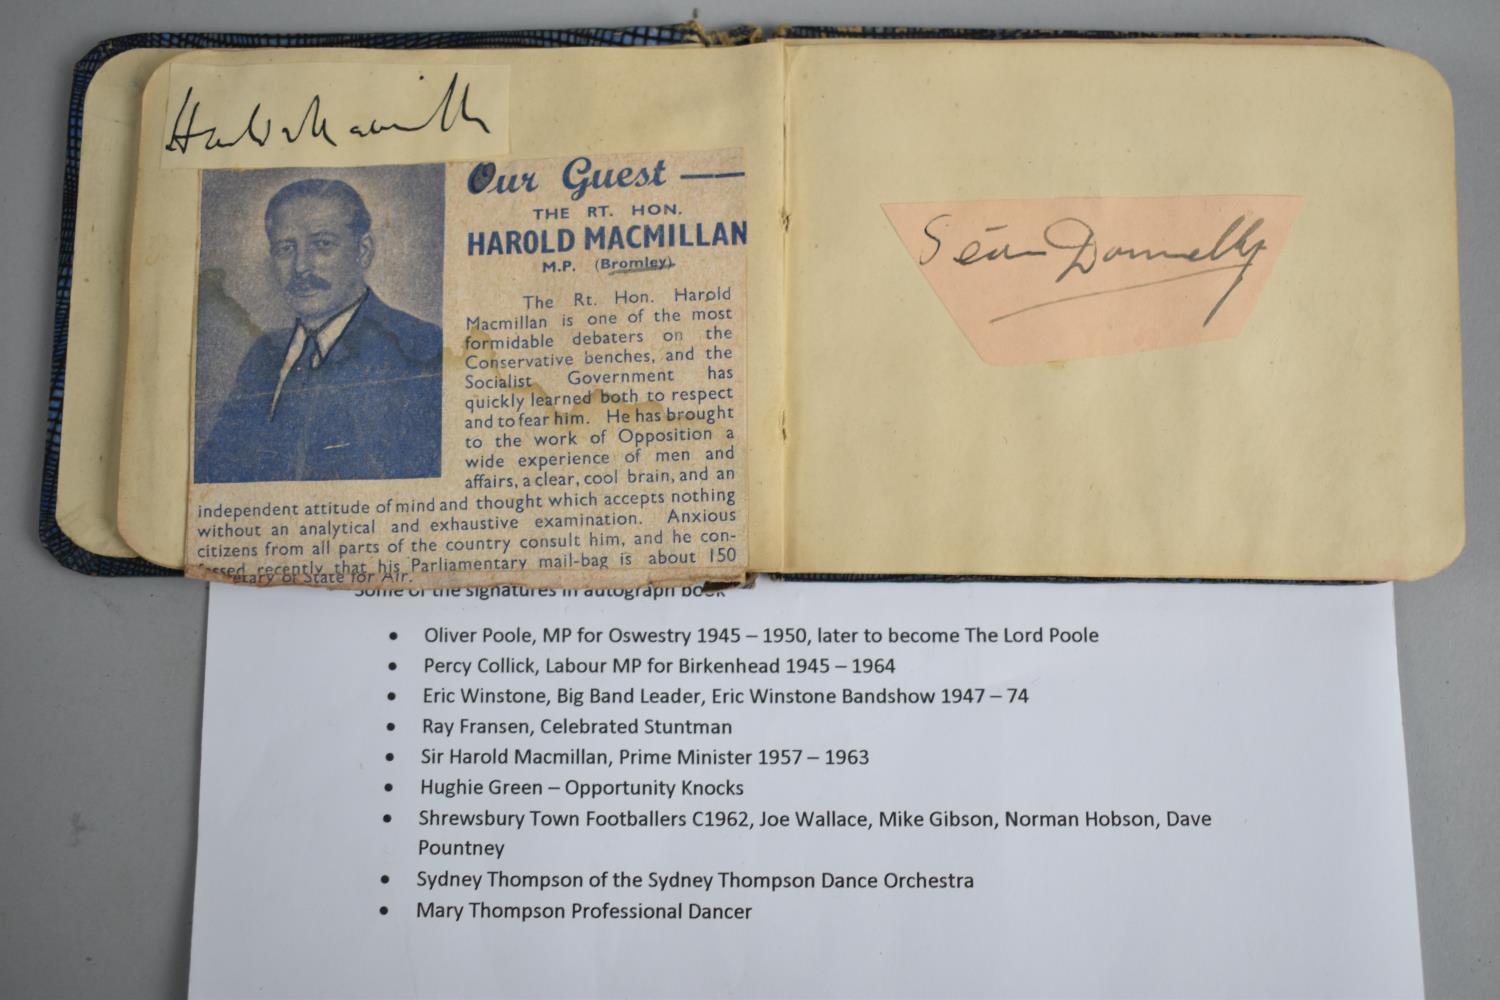 A Vintage Autograph Book Containing Various Autographs to include Harold Macmillan, Prime Minister